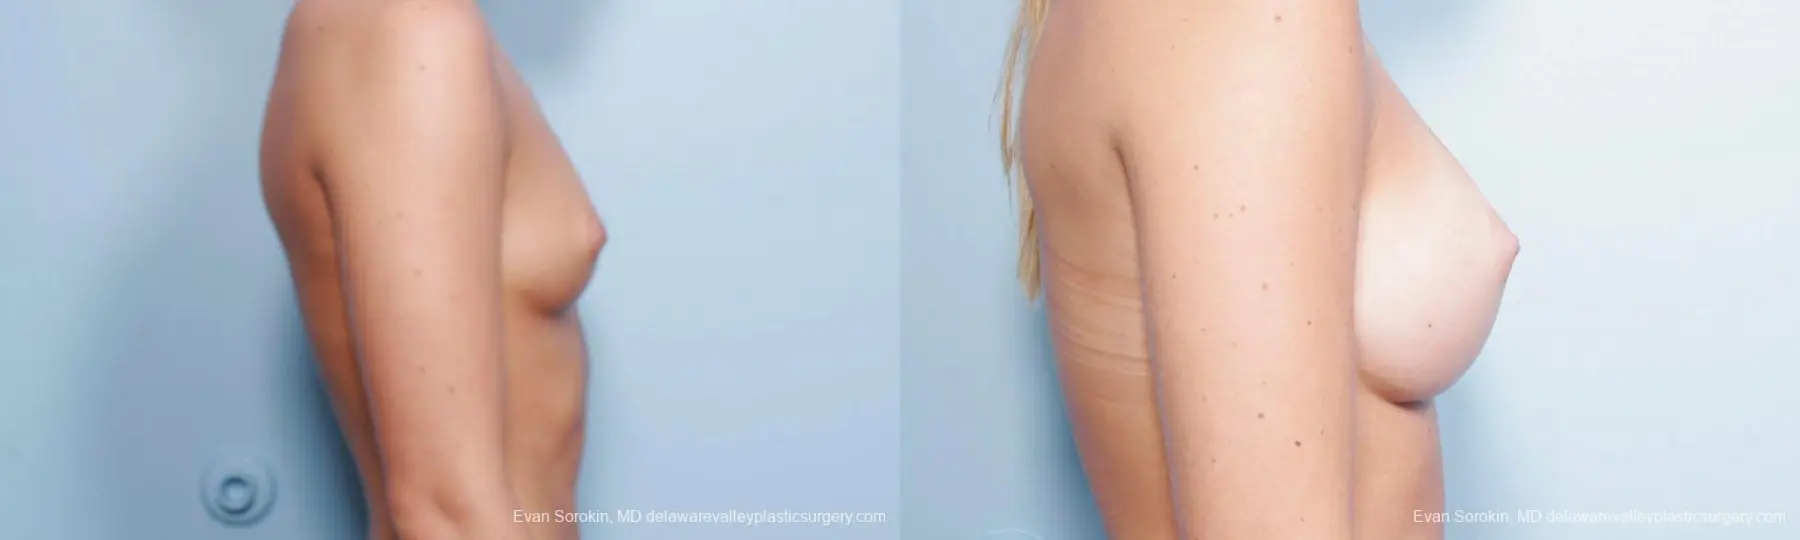 Philadelphia Breast Augmentation 9423 - Before and After 3